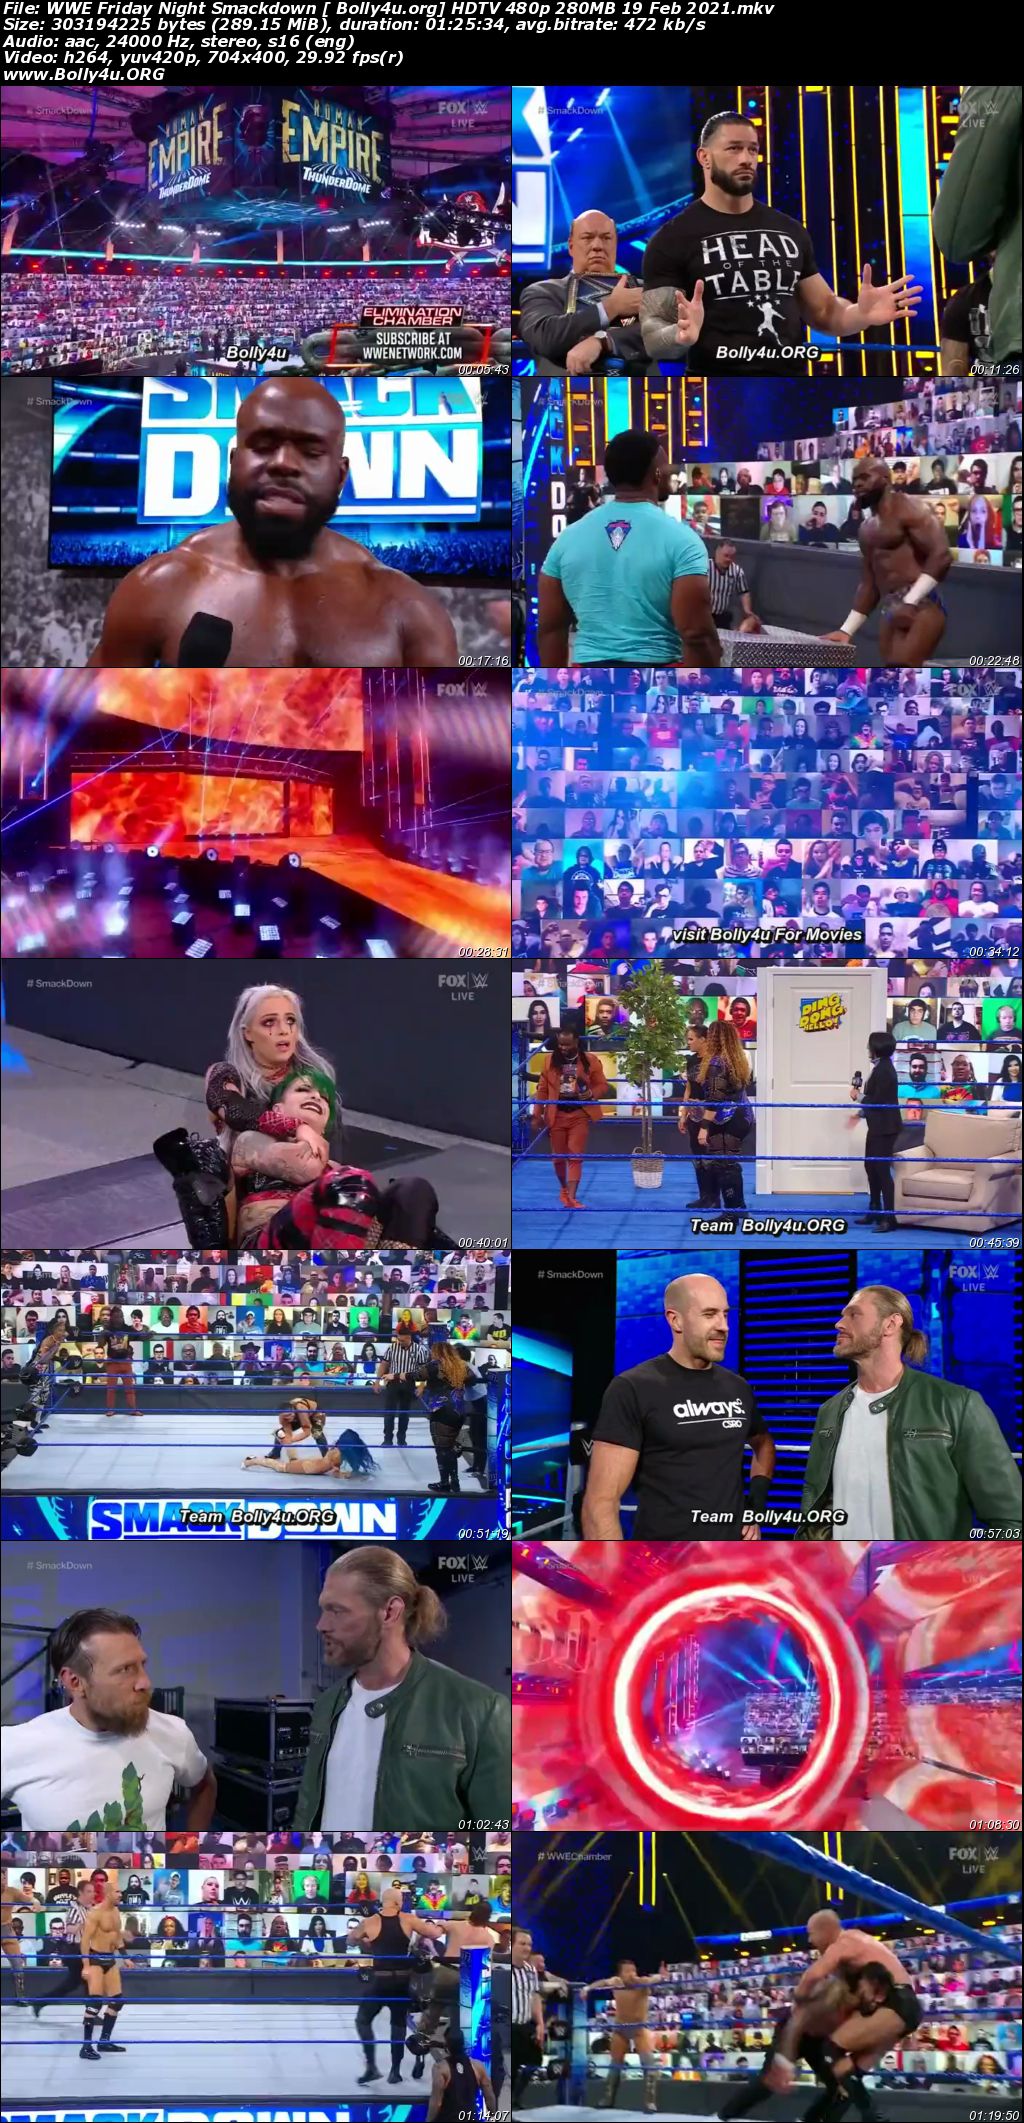 WWE Friday Night Smackdown HDTV 480p 280MB 19 Feb 2021 Download